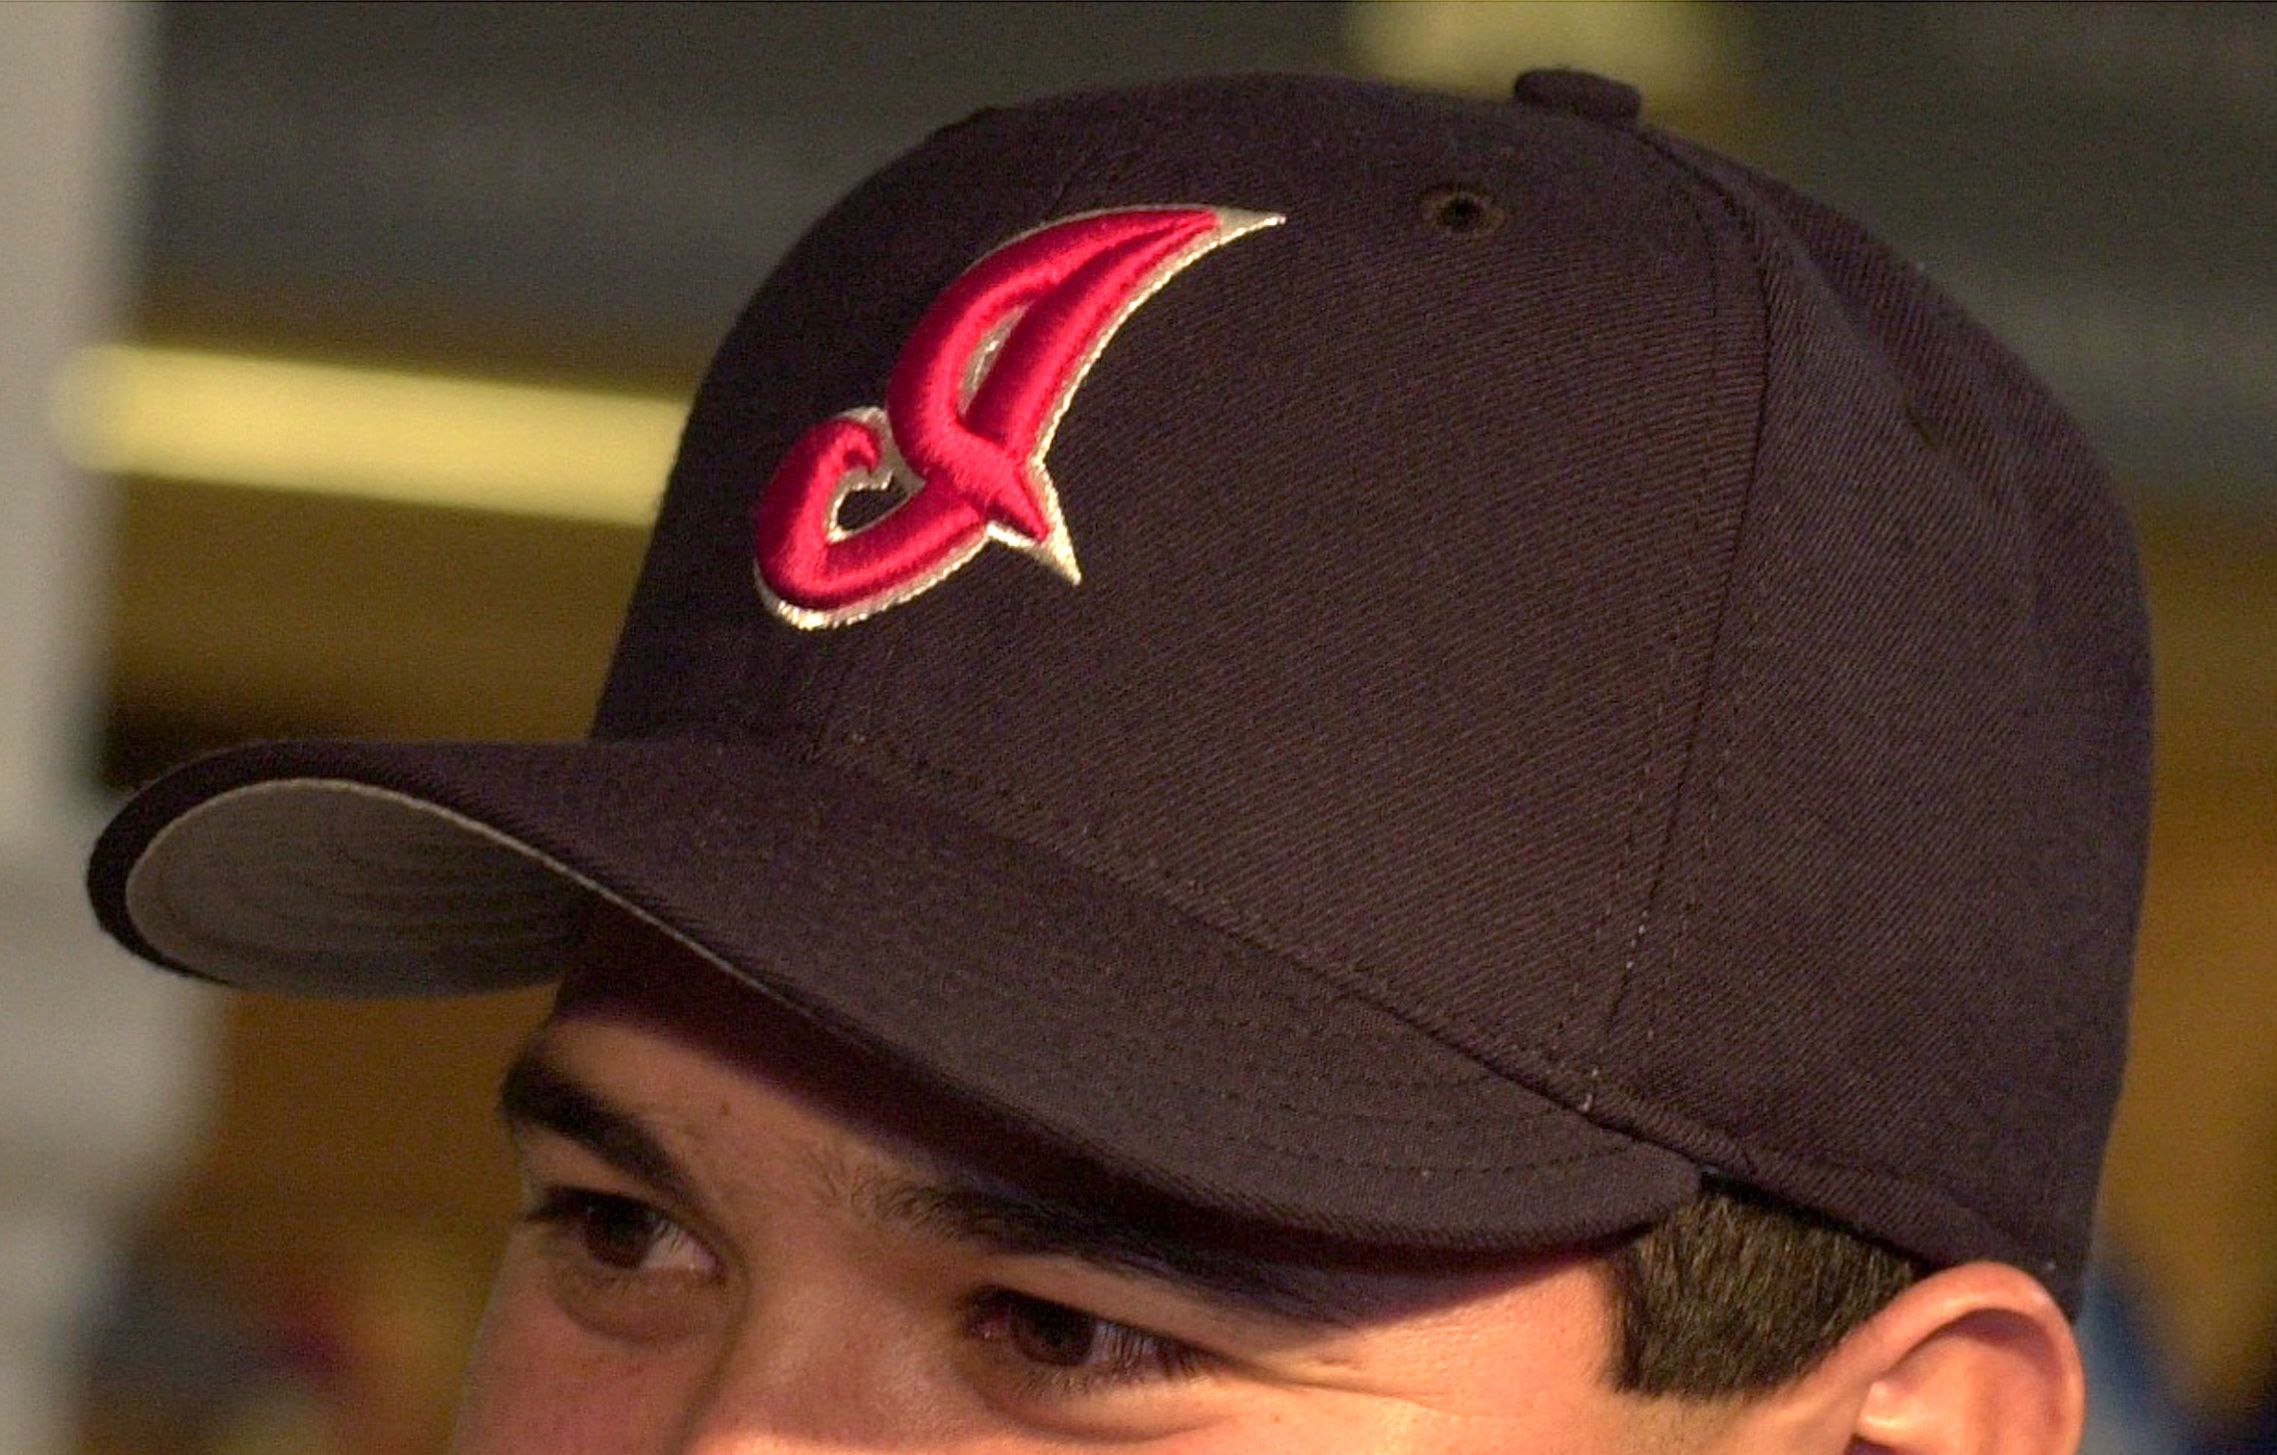 Don't expect to see Cleveland Indians script 'I' logo hats on